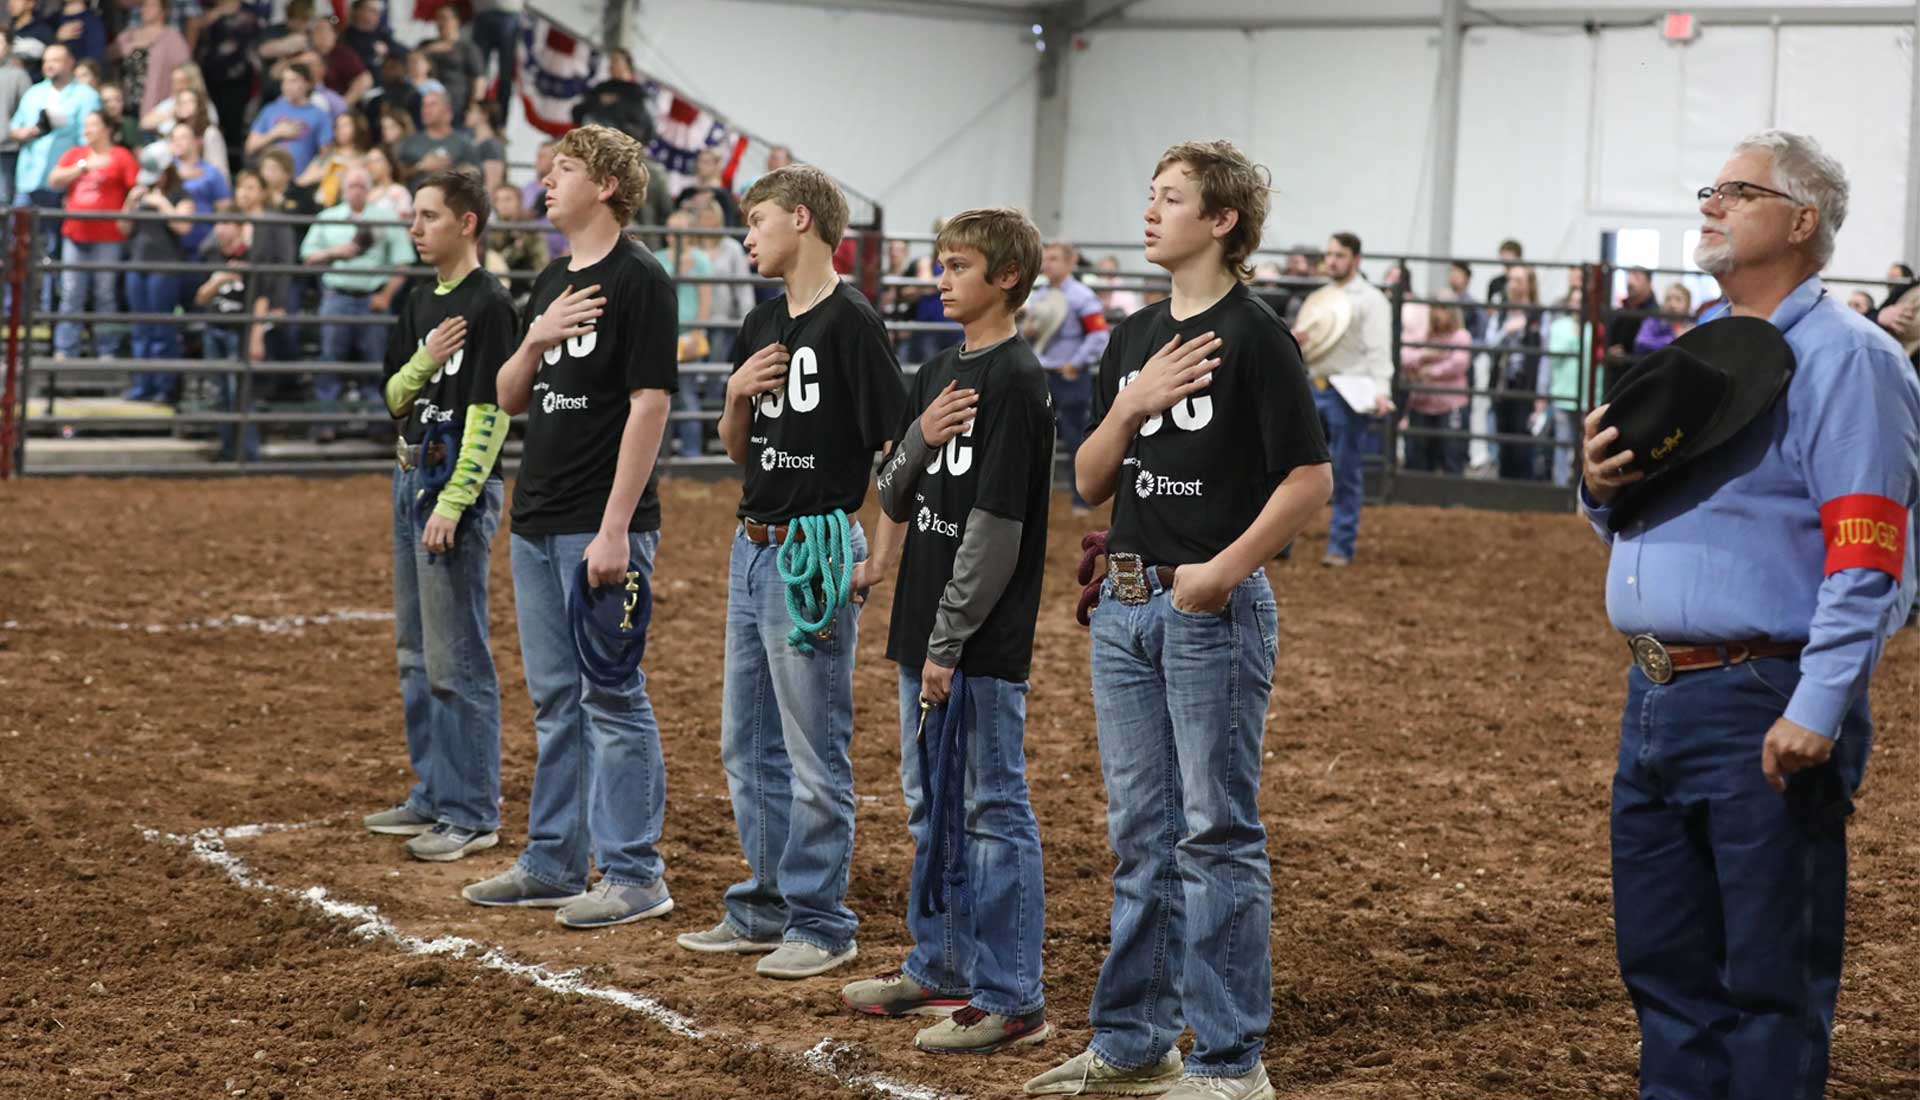 Rodeo Austin Calf Scramble participants with hands on heart during the National Anthem